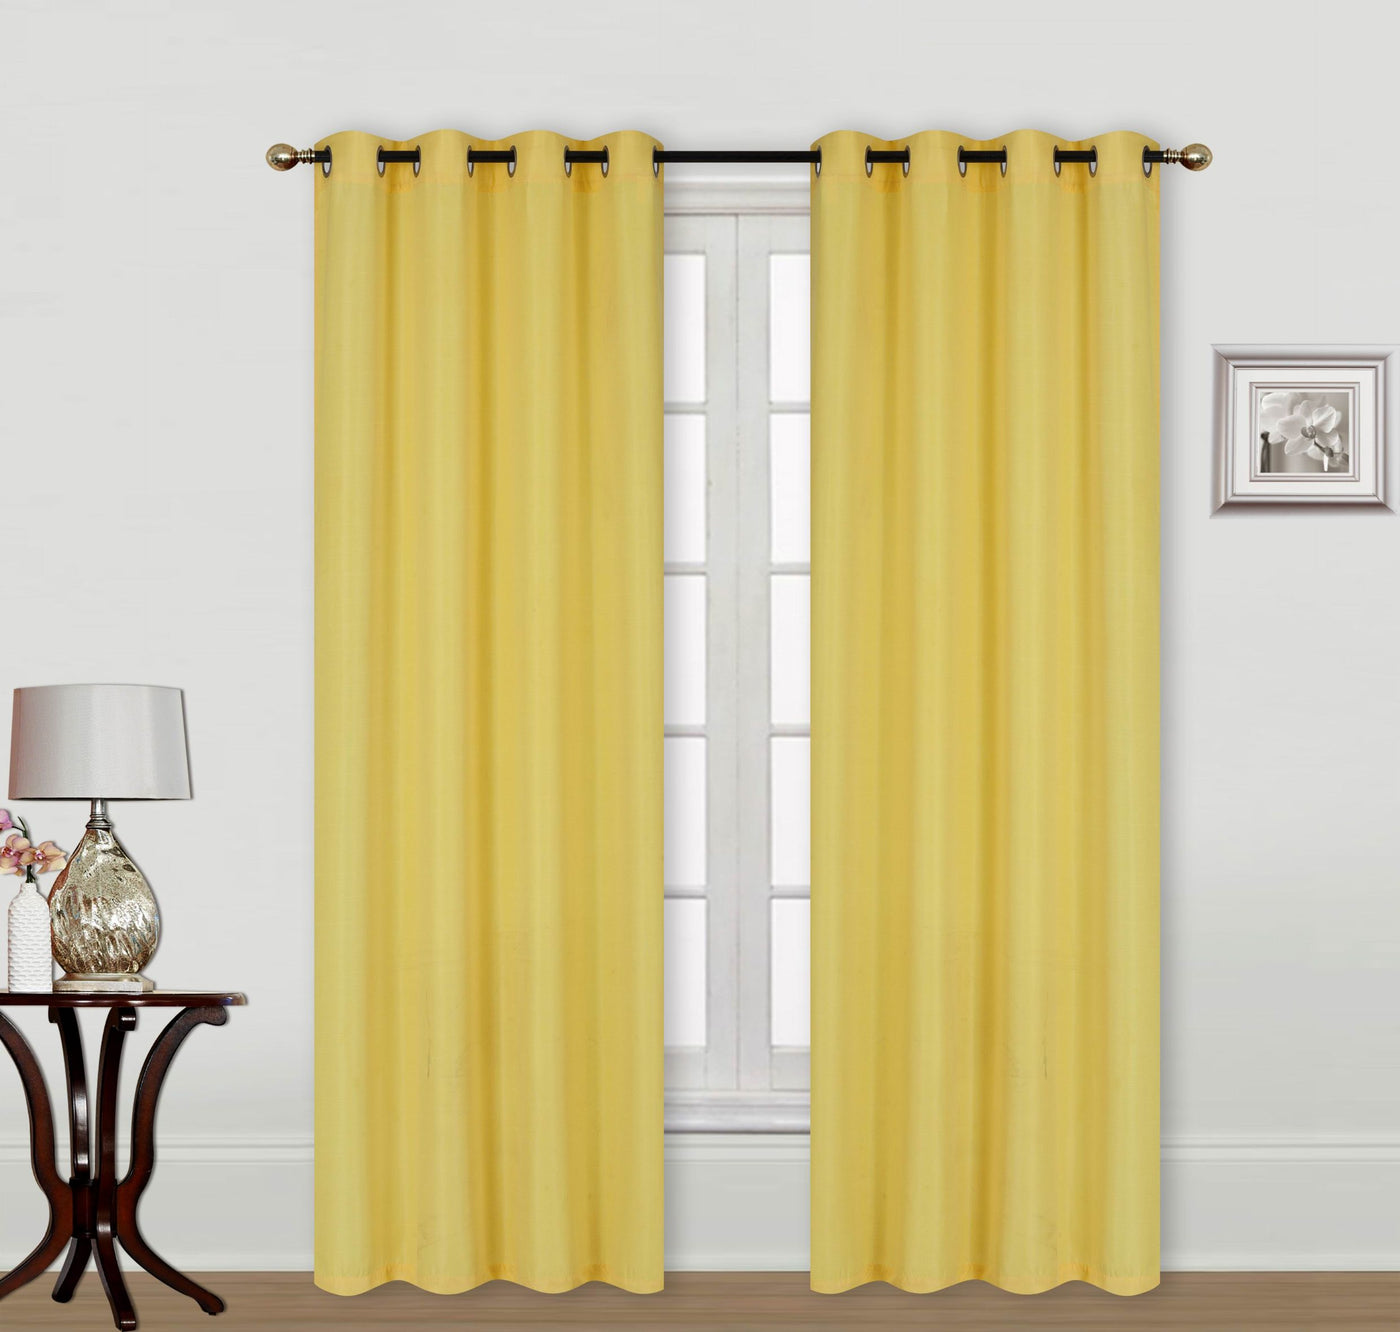 Home Curtains Solid Linen Wide Window Curtain Panel Pair with Grommet Top Window Treatment | Jenin Home Furnishing.